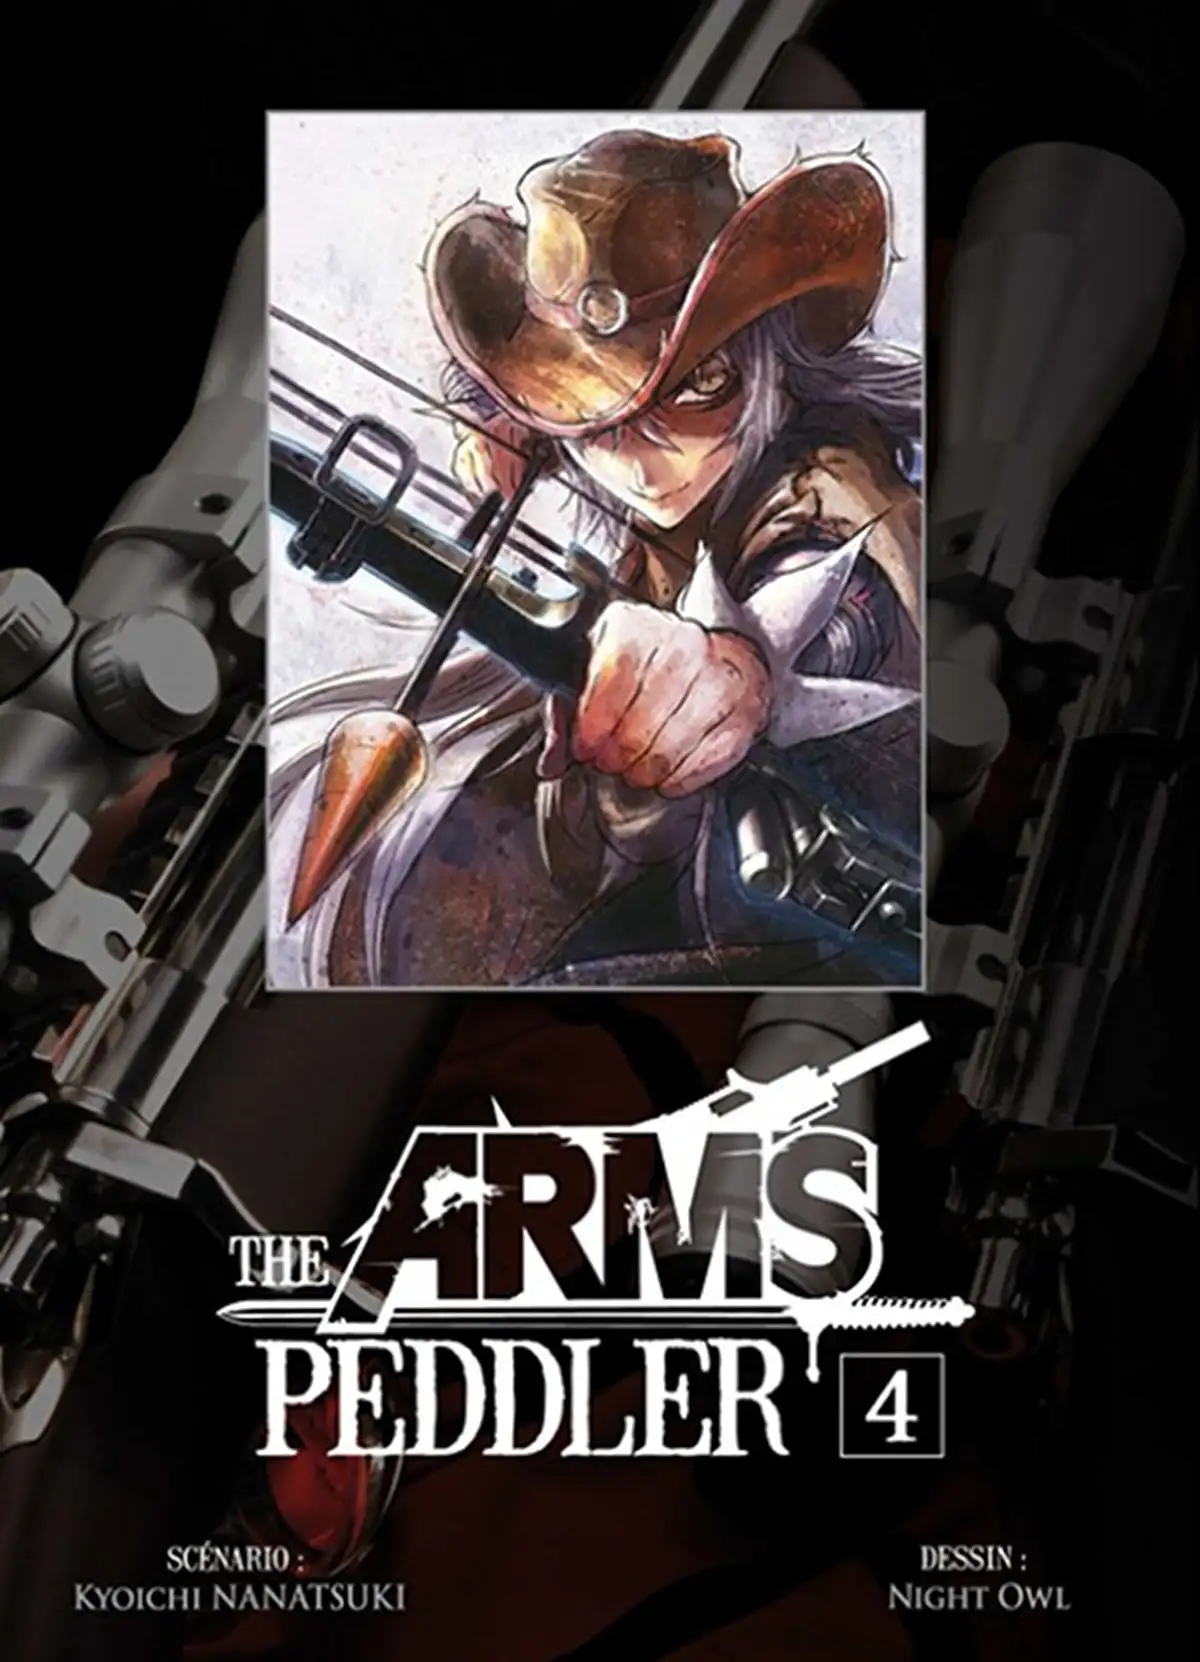 The Arms Peddler Volume 4 page 1